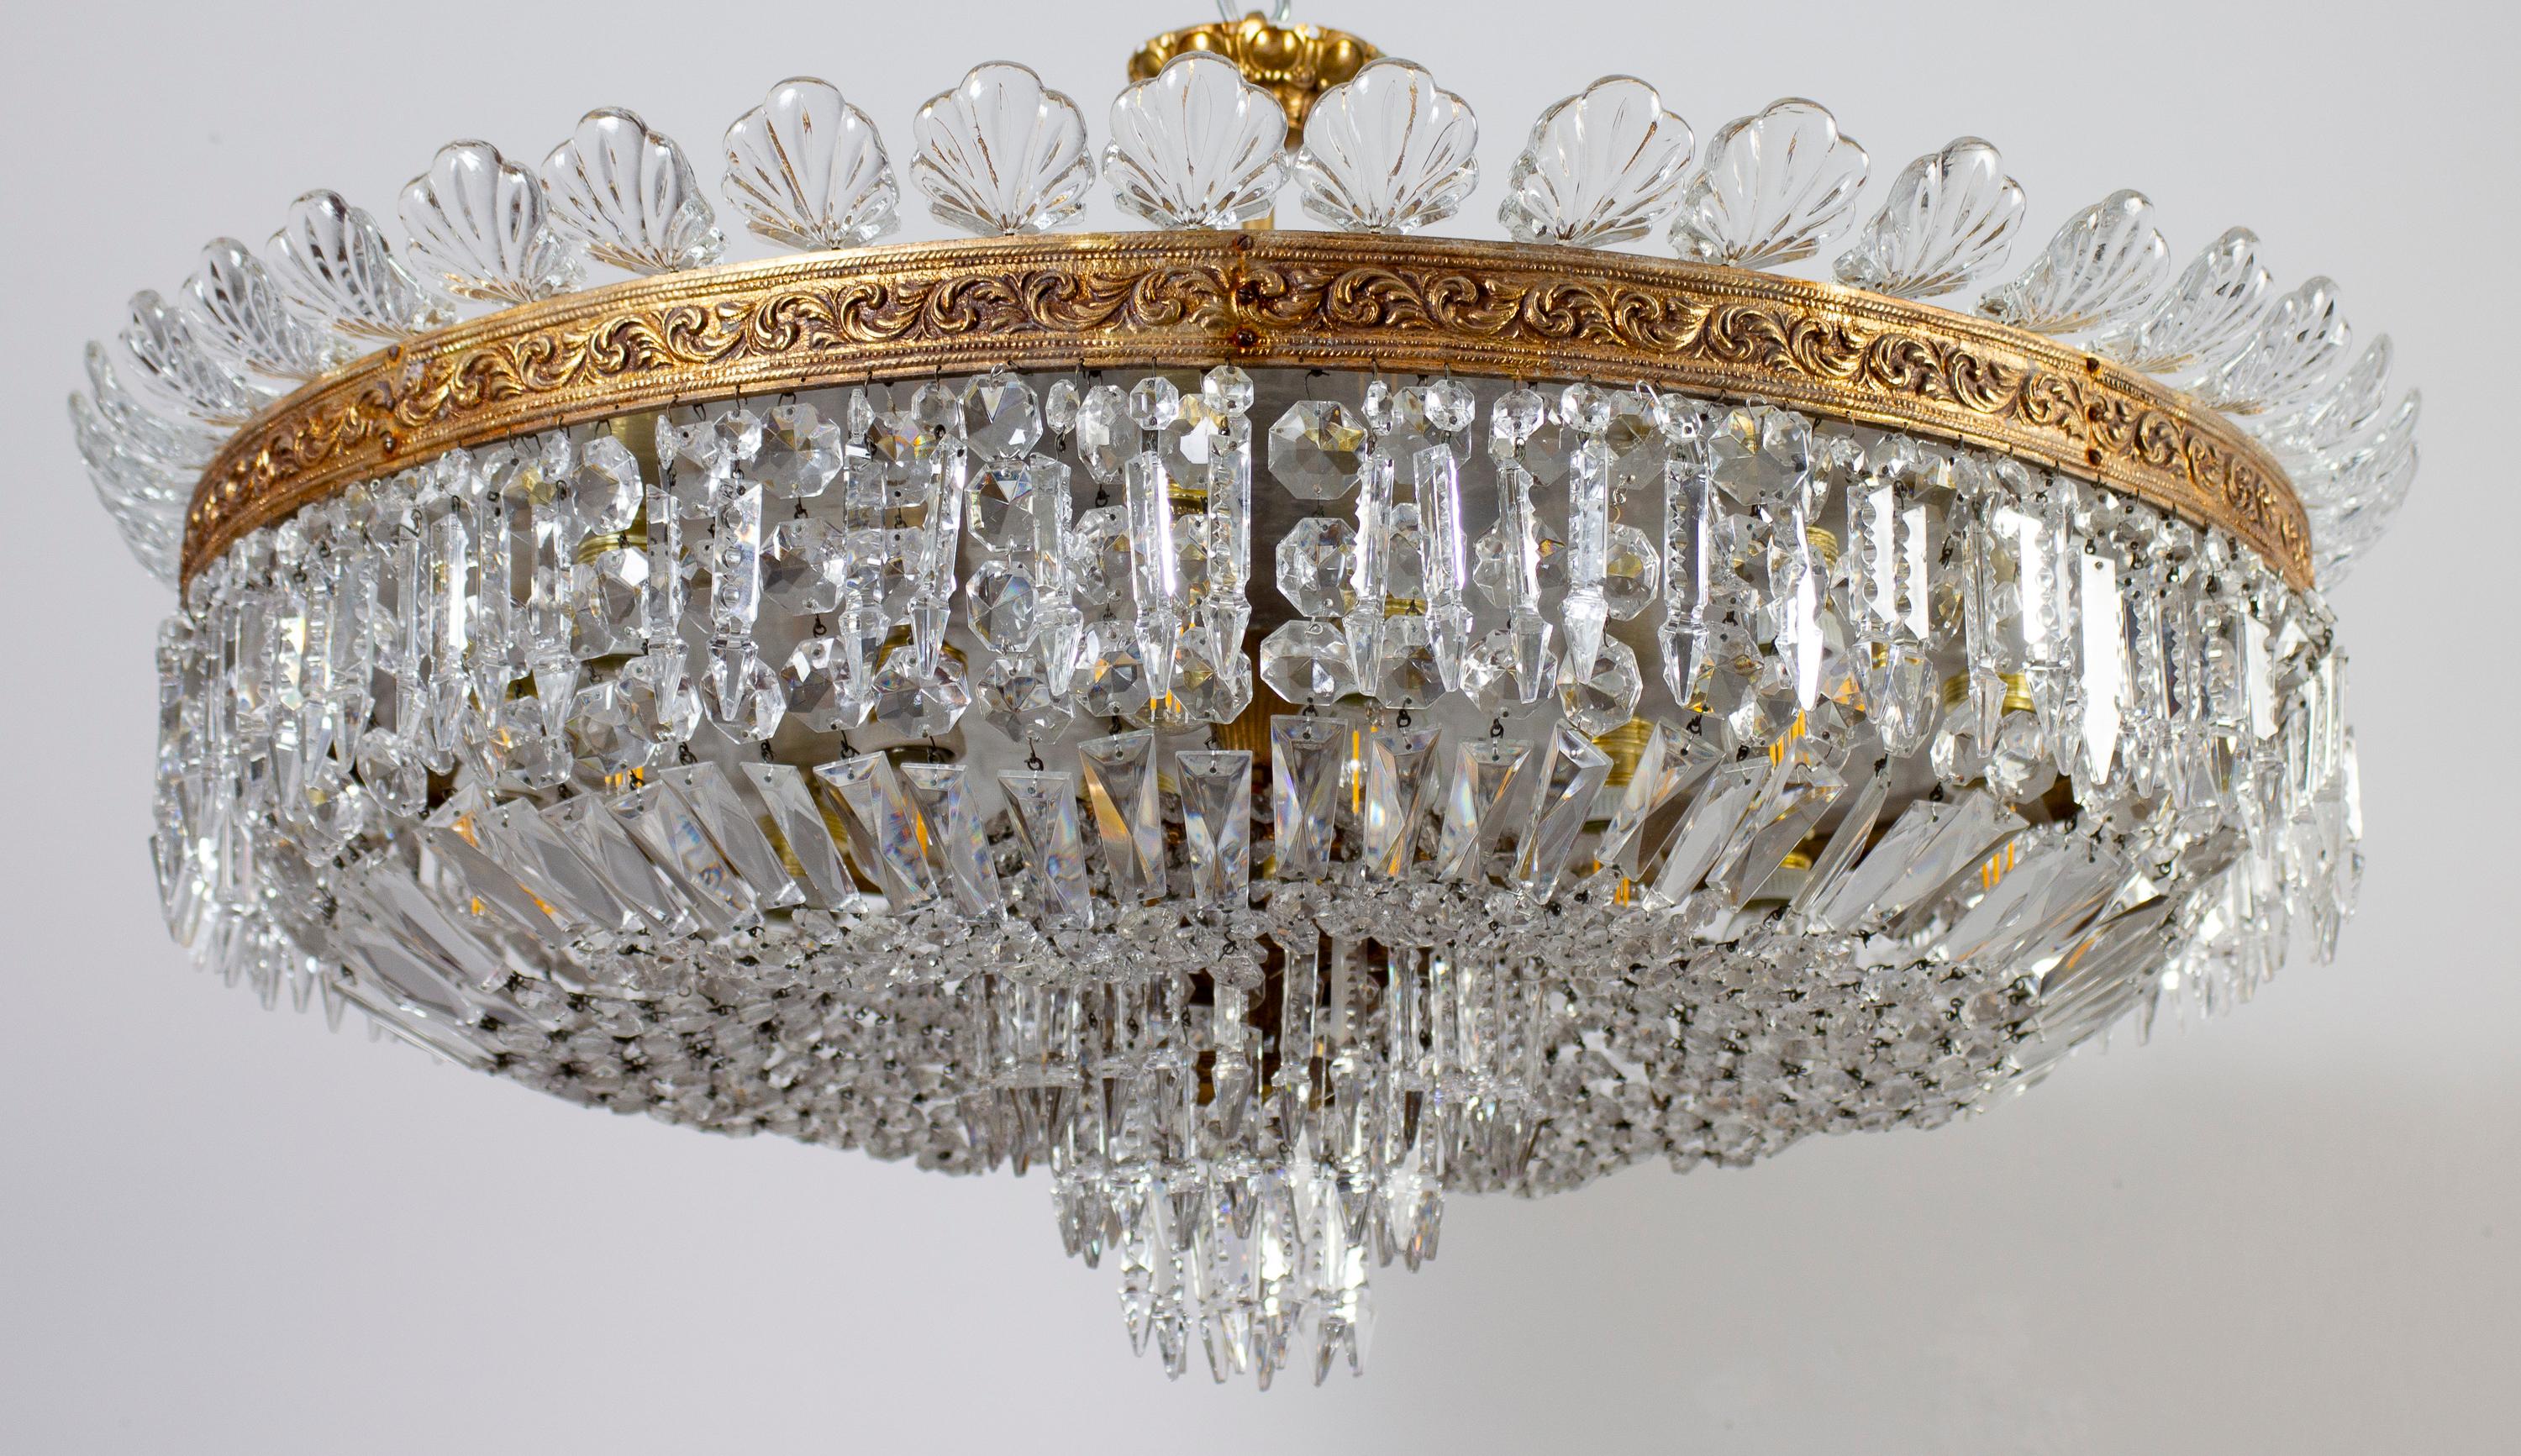 This Luxurious large and round shaped chandelier supporting a set of precious cut crystal prisms, octagons, oak leaves etc. 
Ideal for a large reception room, dining room or entrance hall centerpiece.
12 light bulbs E24.
Cleaned and re-wired, in